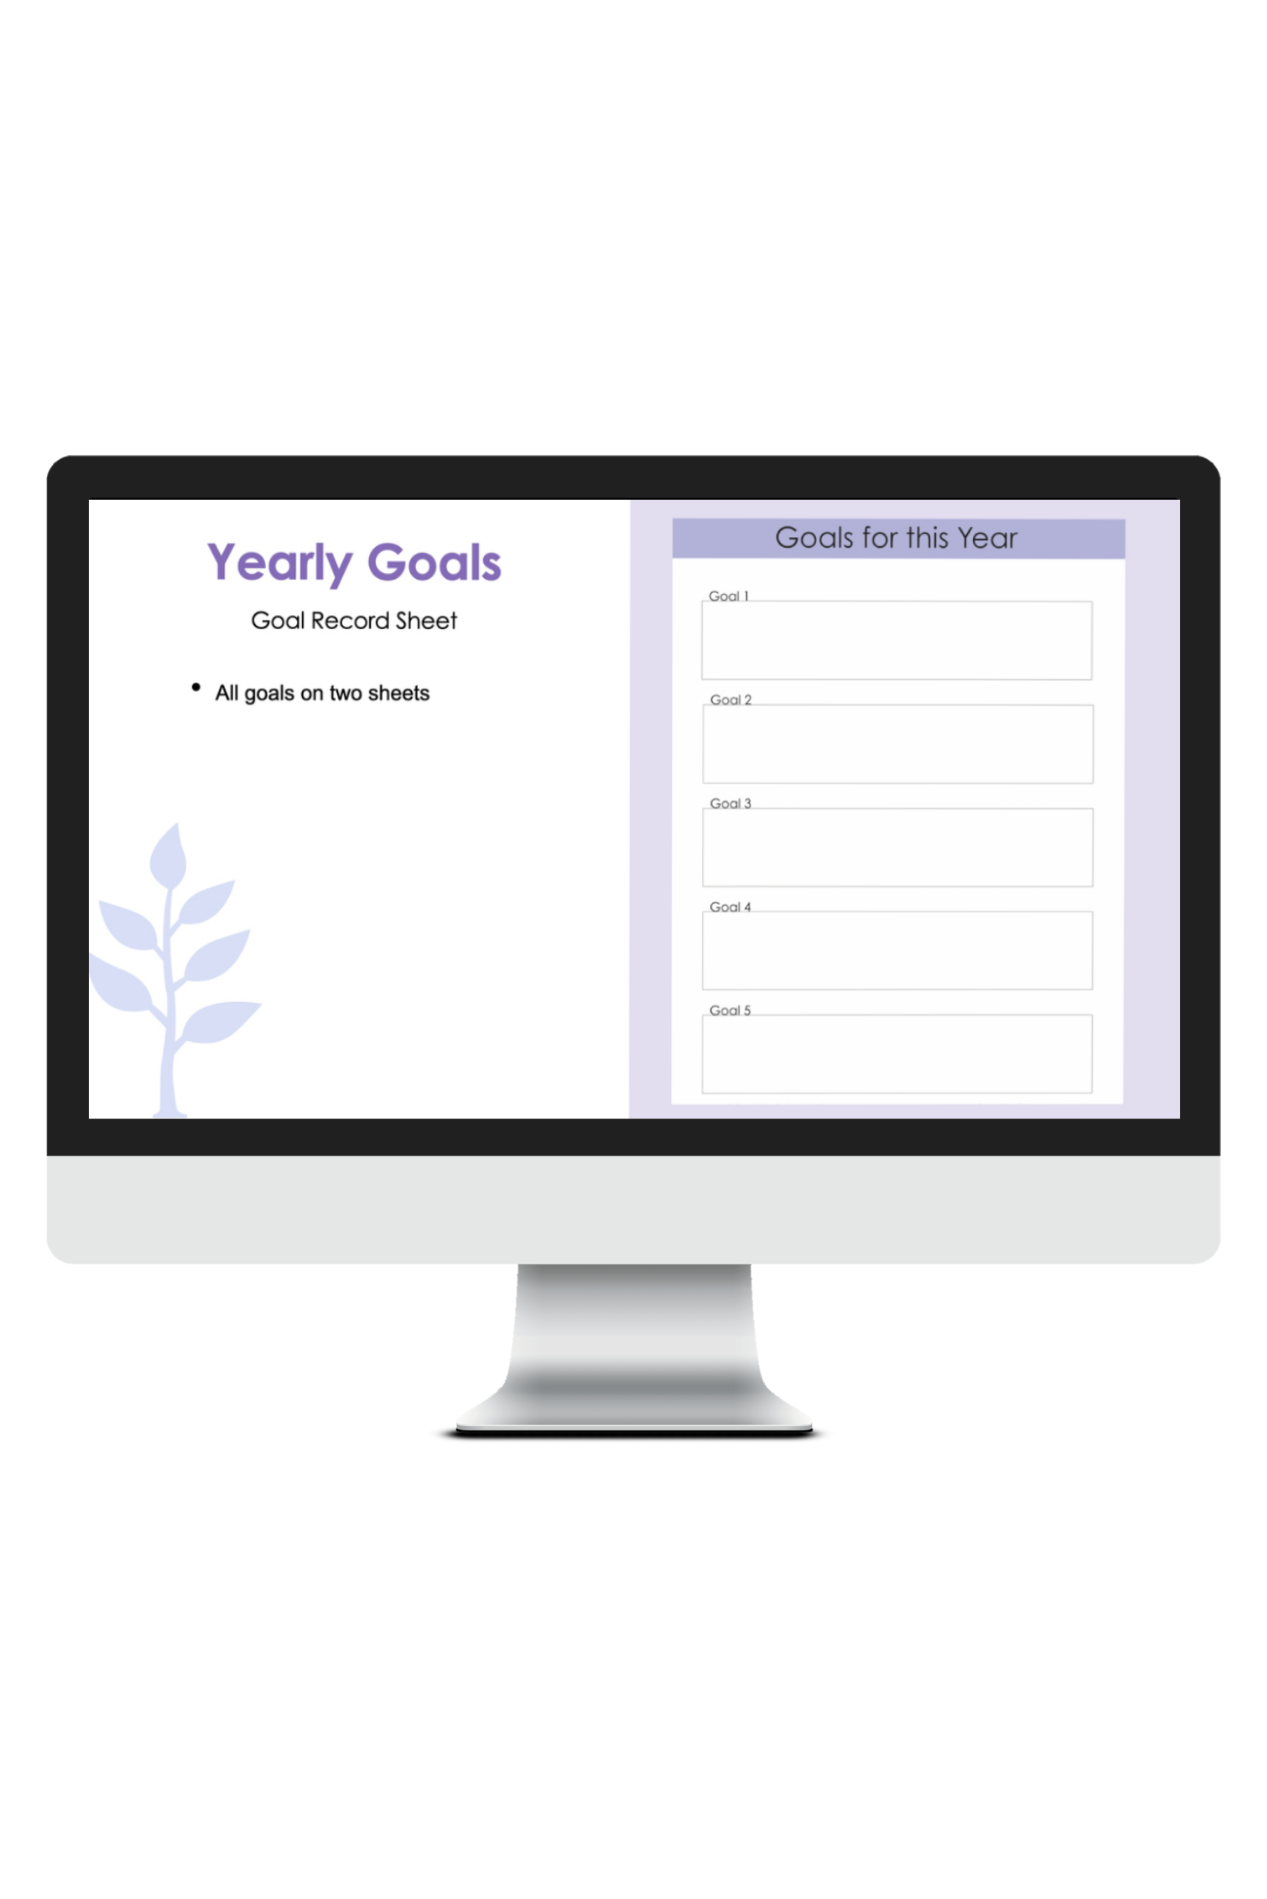 The yearly goals planning page.